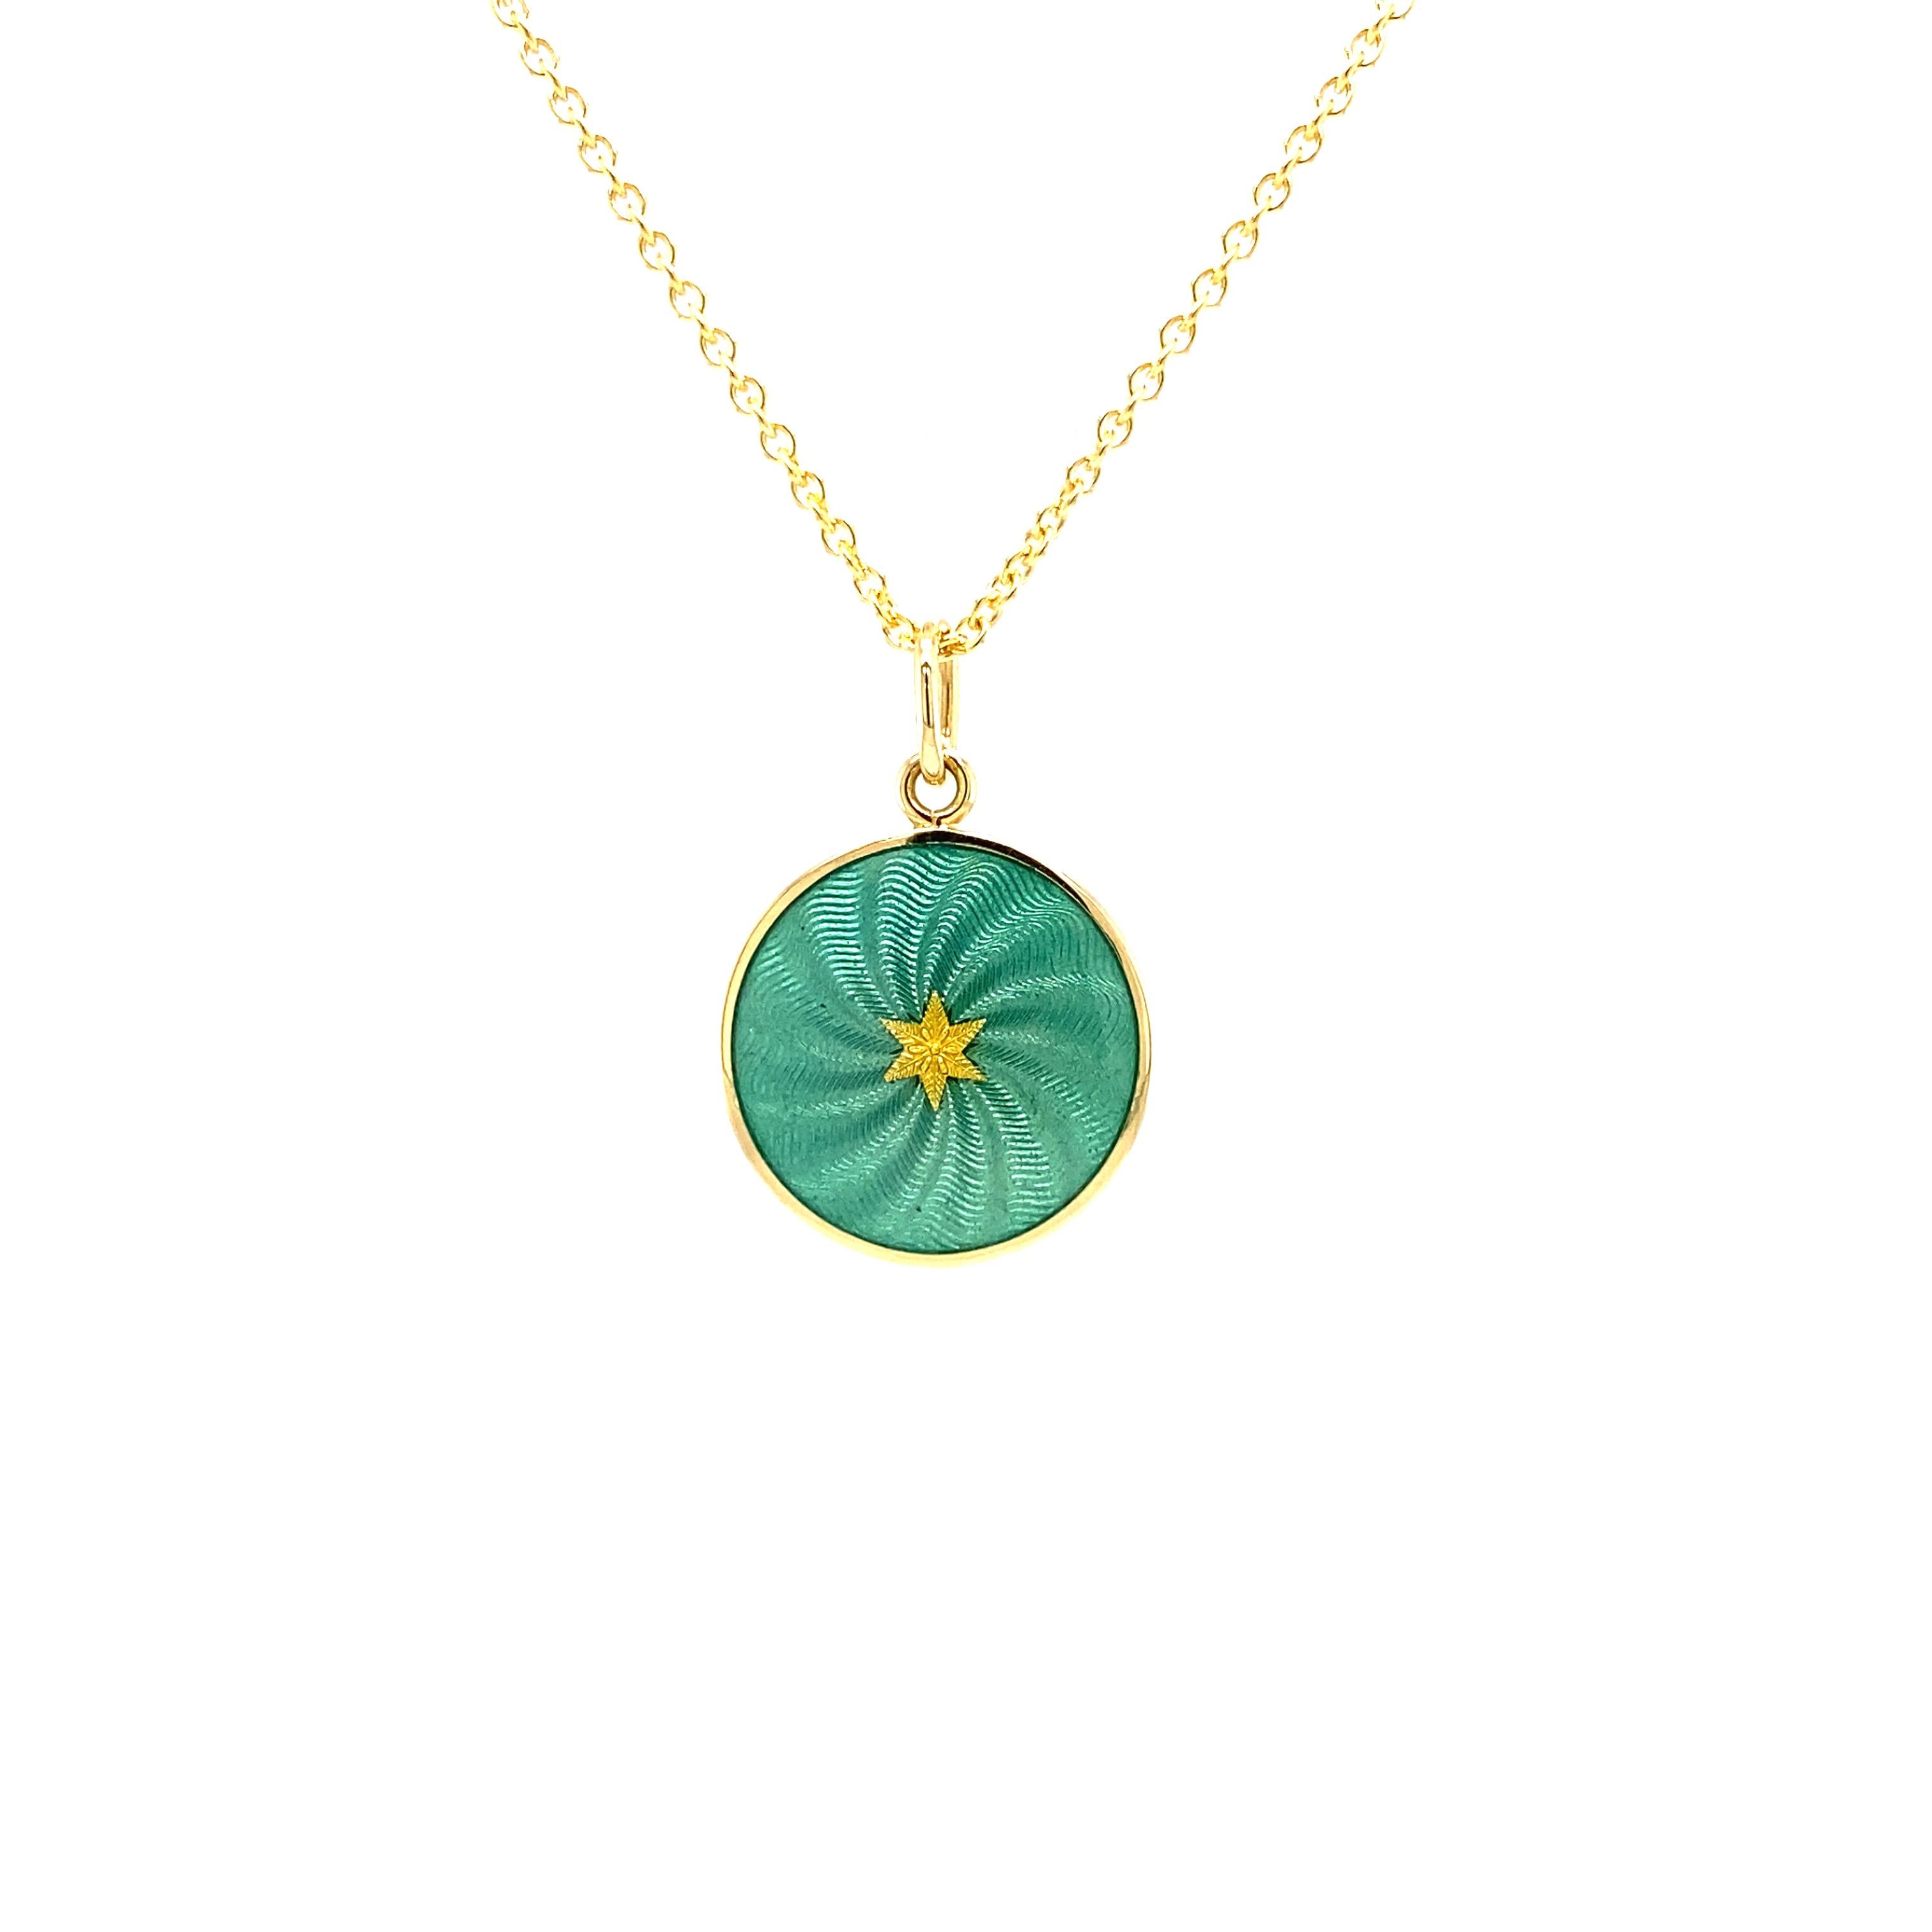 Round Disk Pendant Necklace 18k Yellow Gold Turquoise Enamel Guilloche Paillons For Sale 2